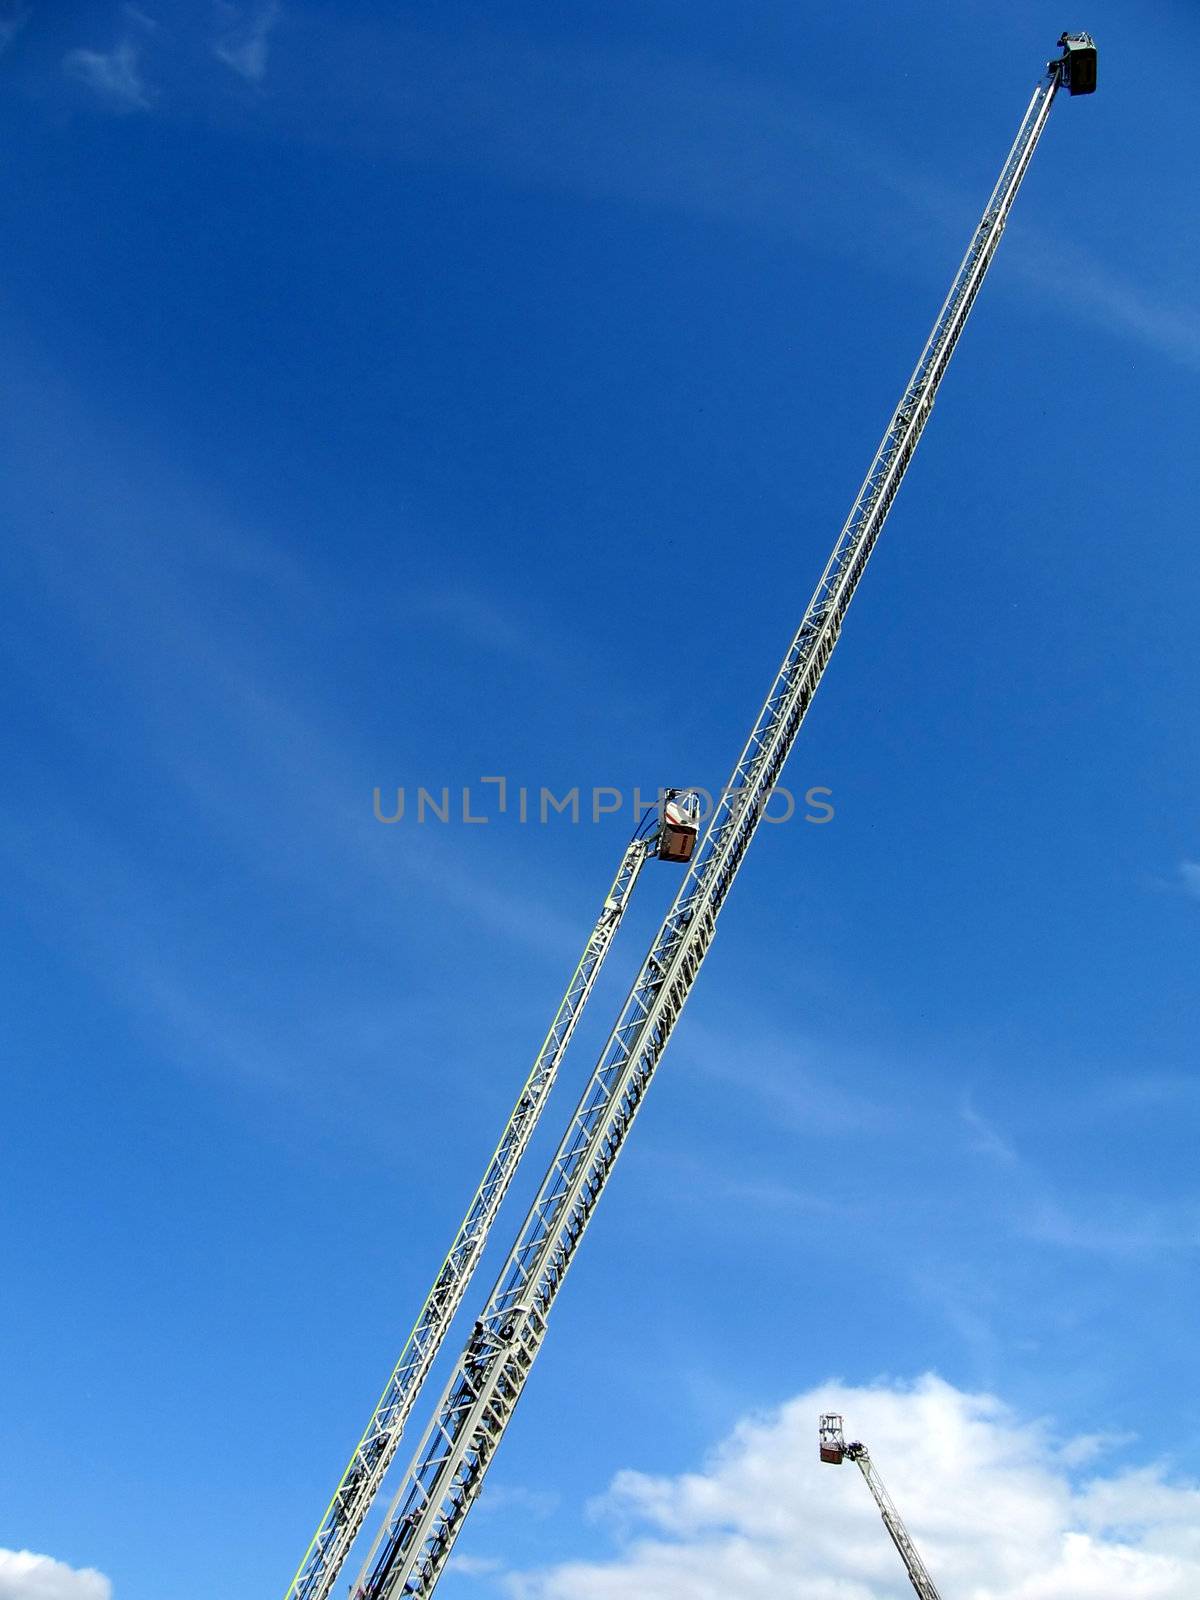 Very high metal fire ladders on a background of blue sky